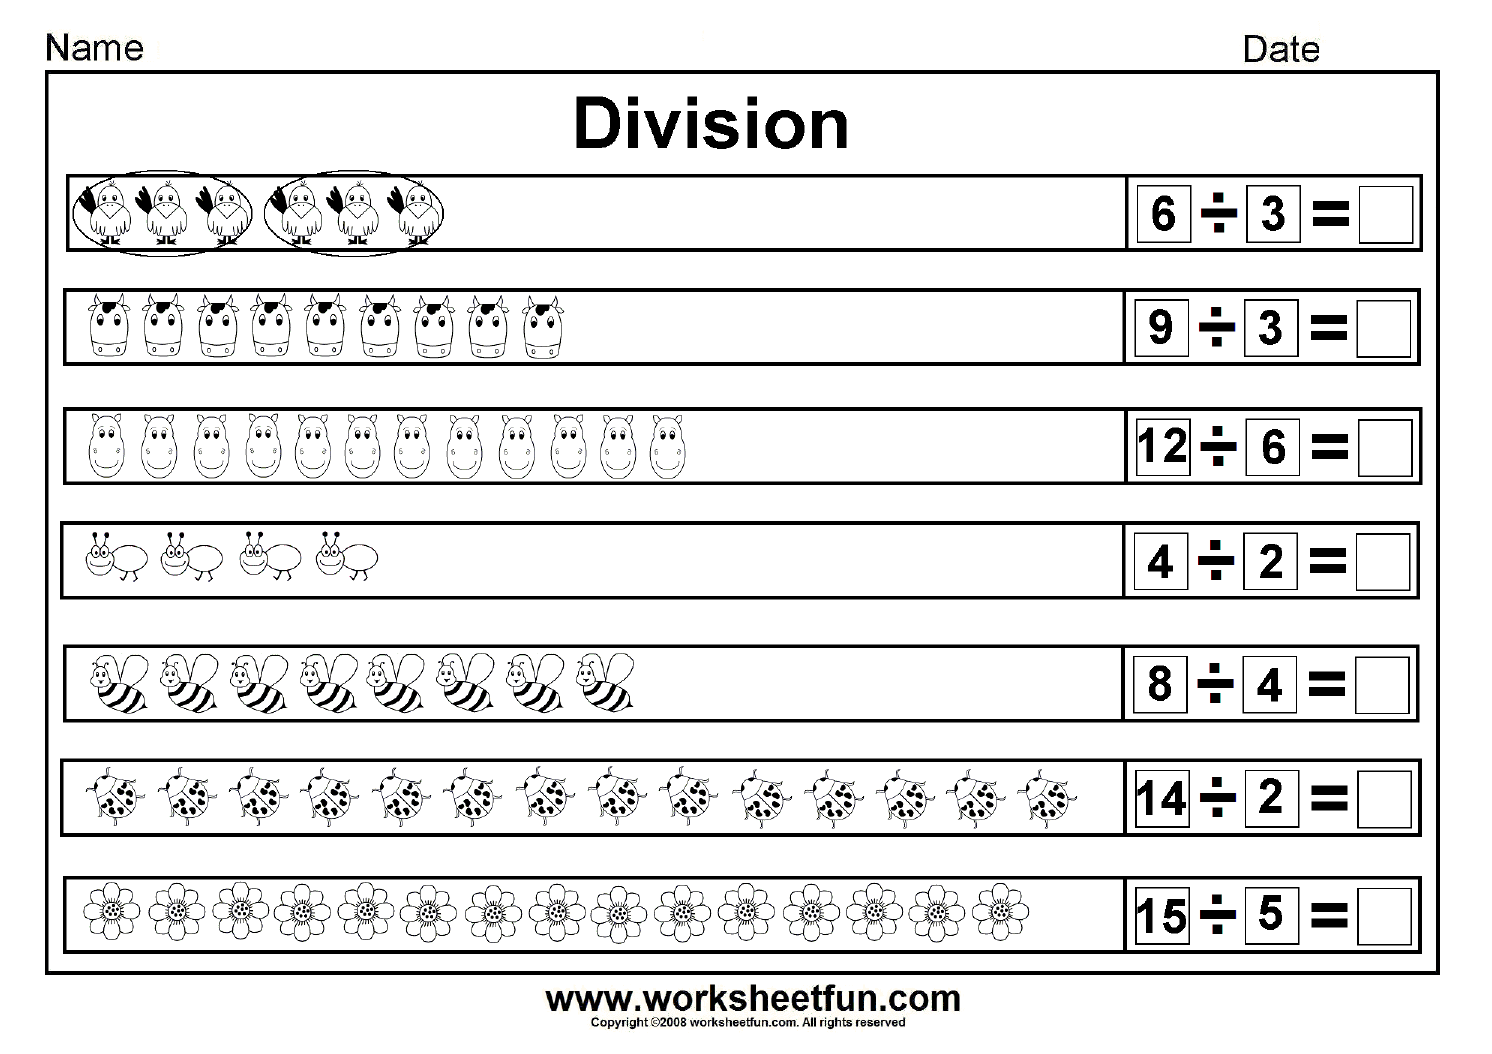 Basic Division Worksheets With Pictures